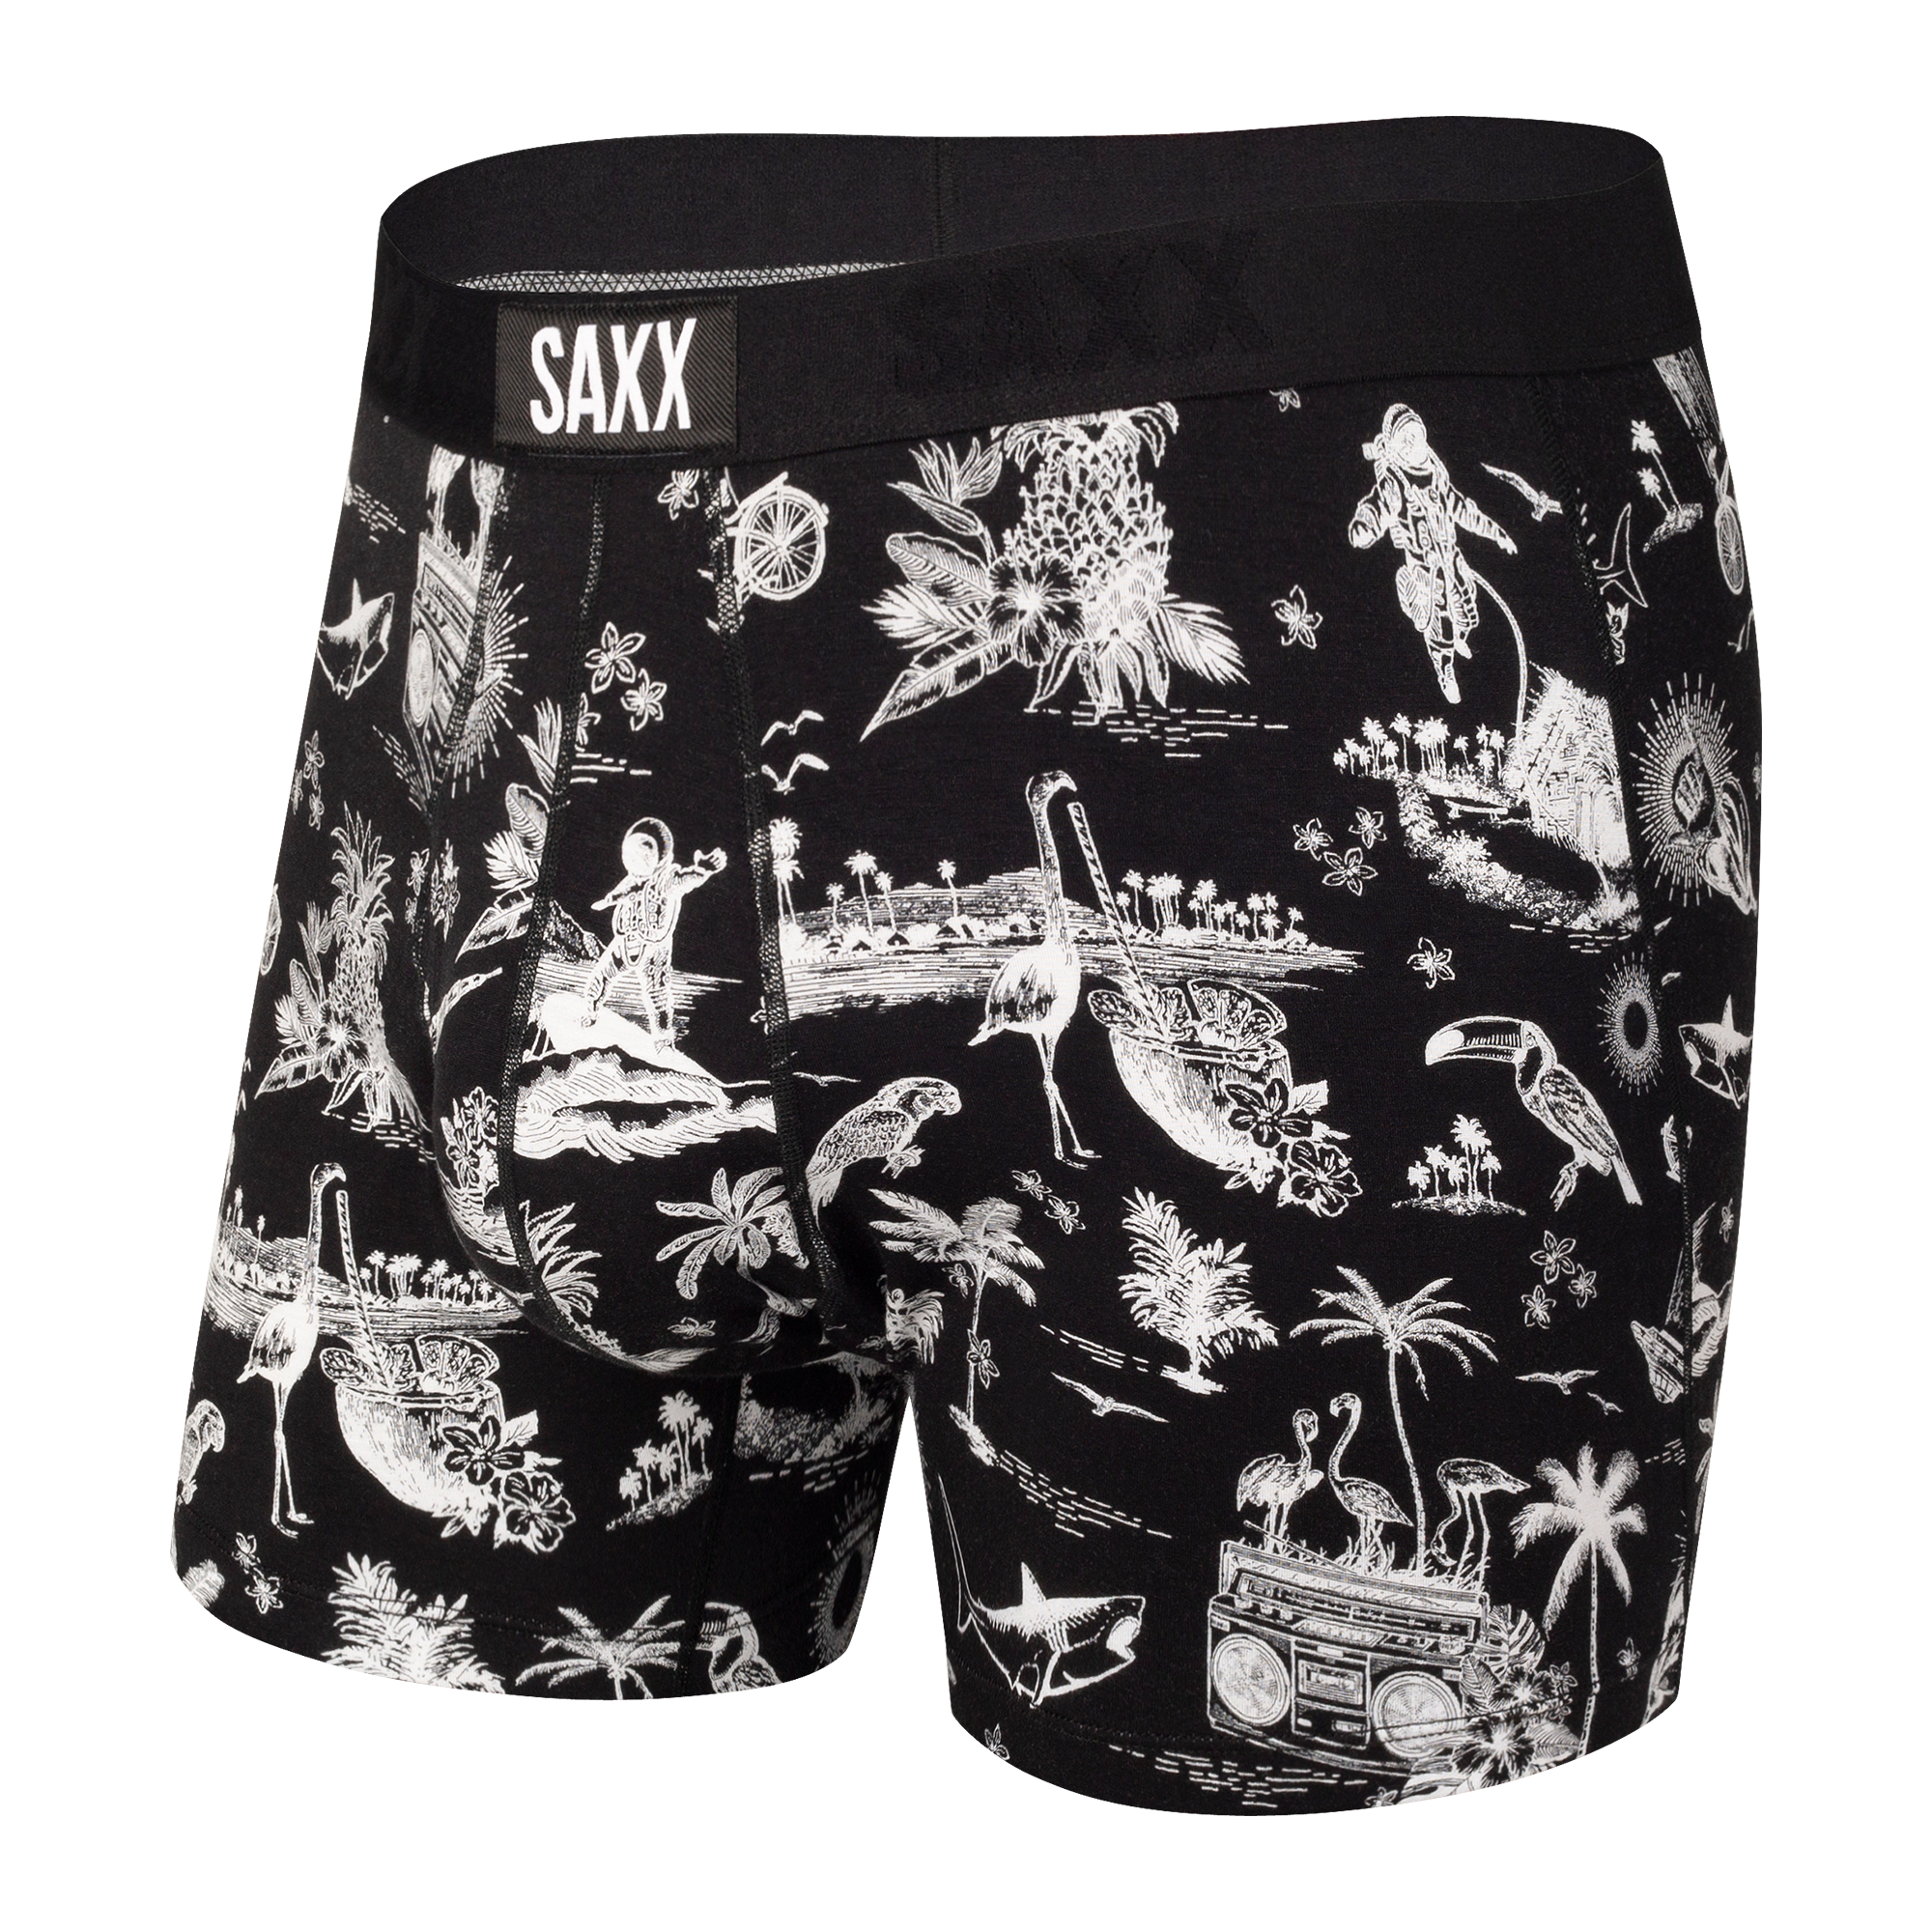 Saxx Ultra Boxer - Black Astro Surf and Turf – Sheer Essentials